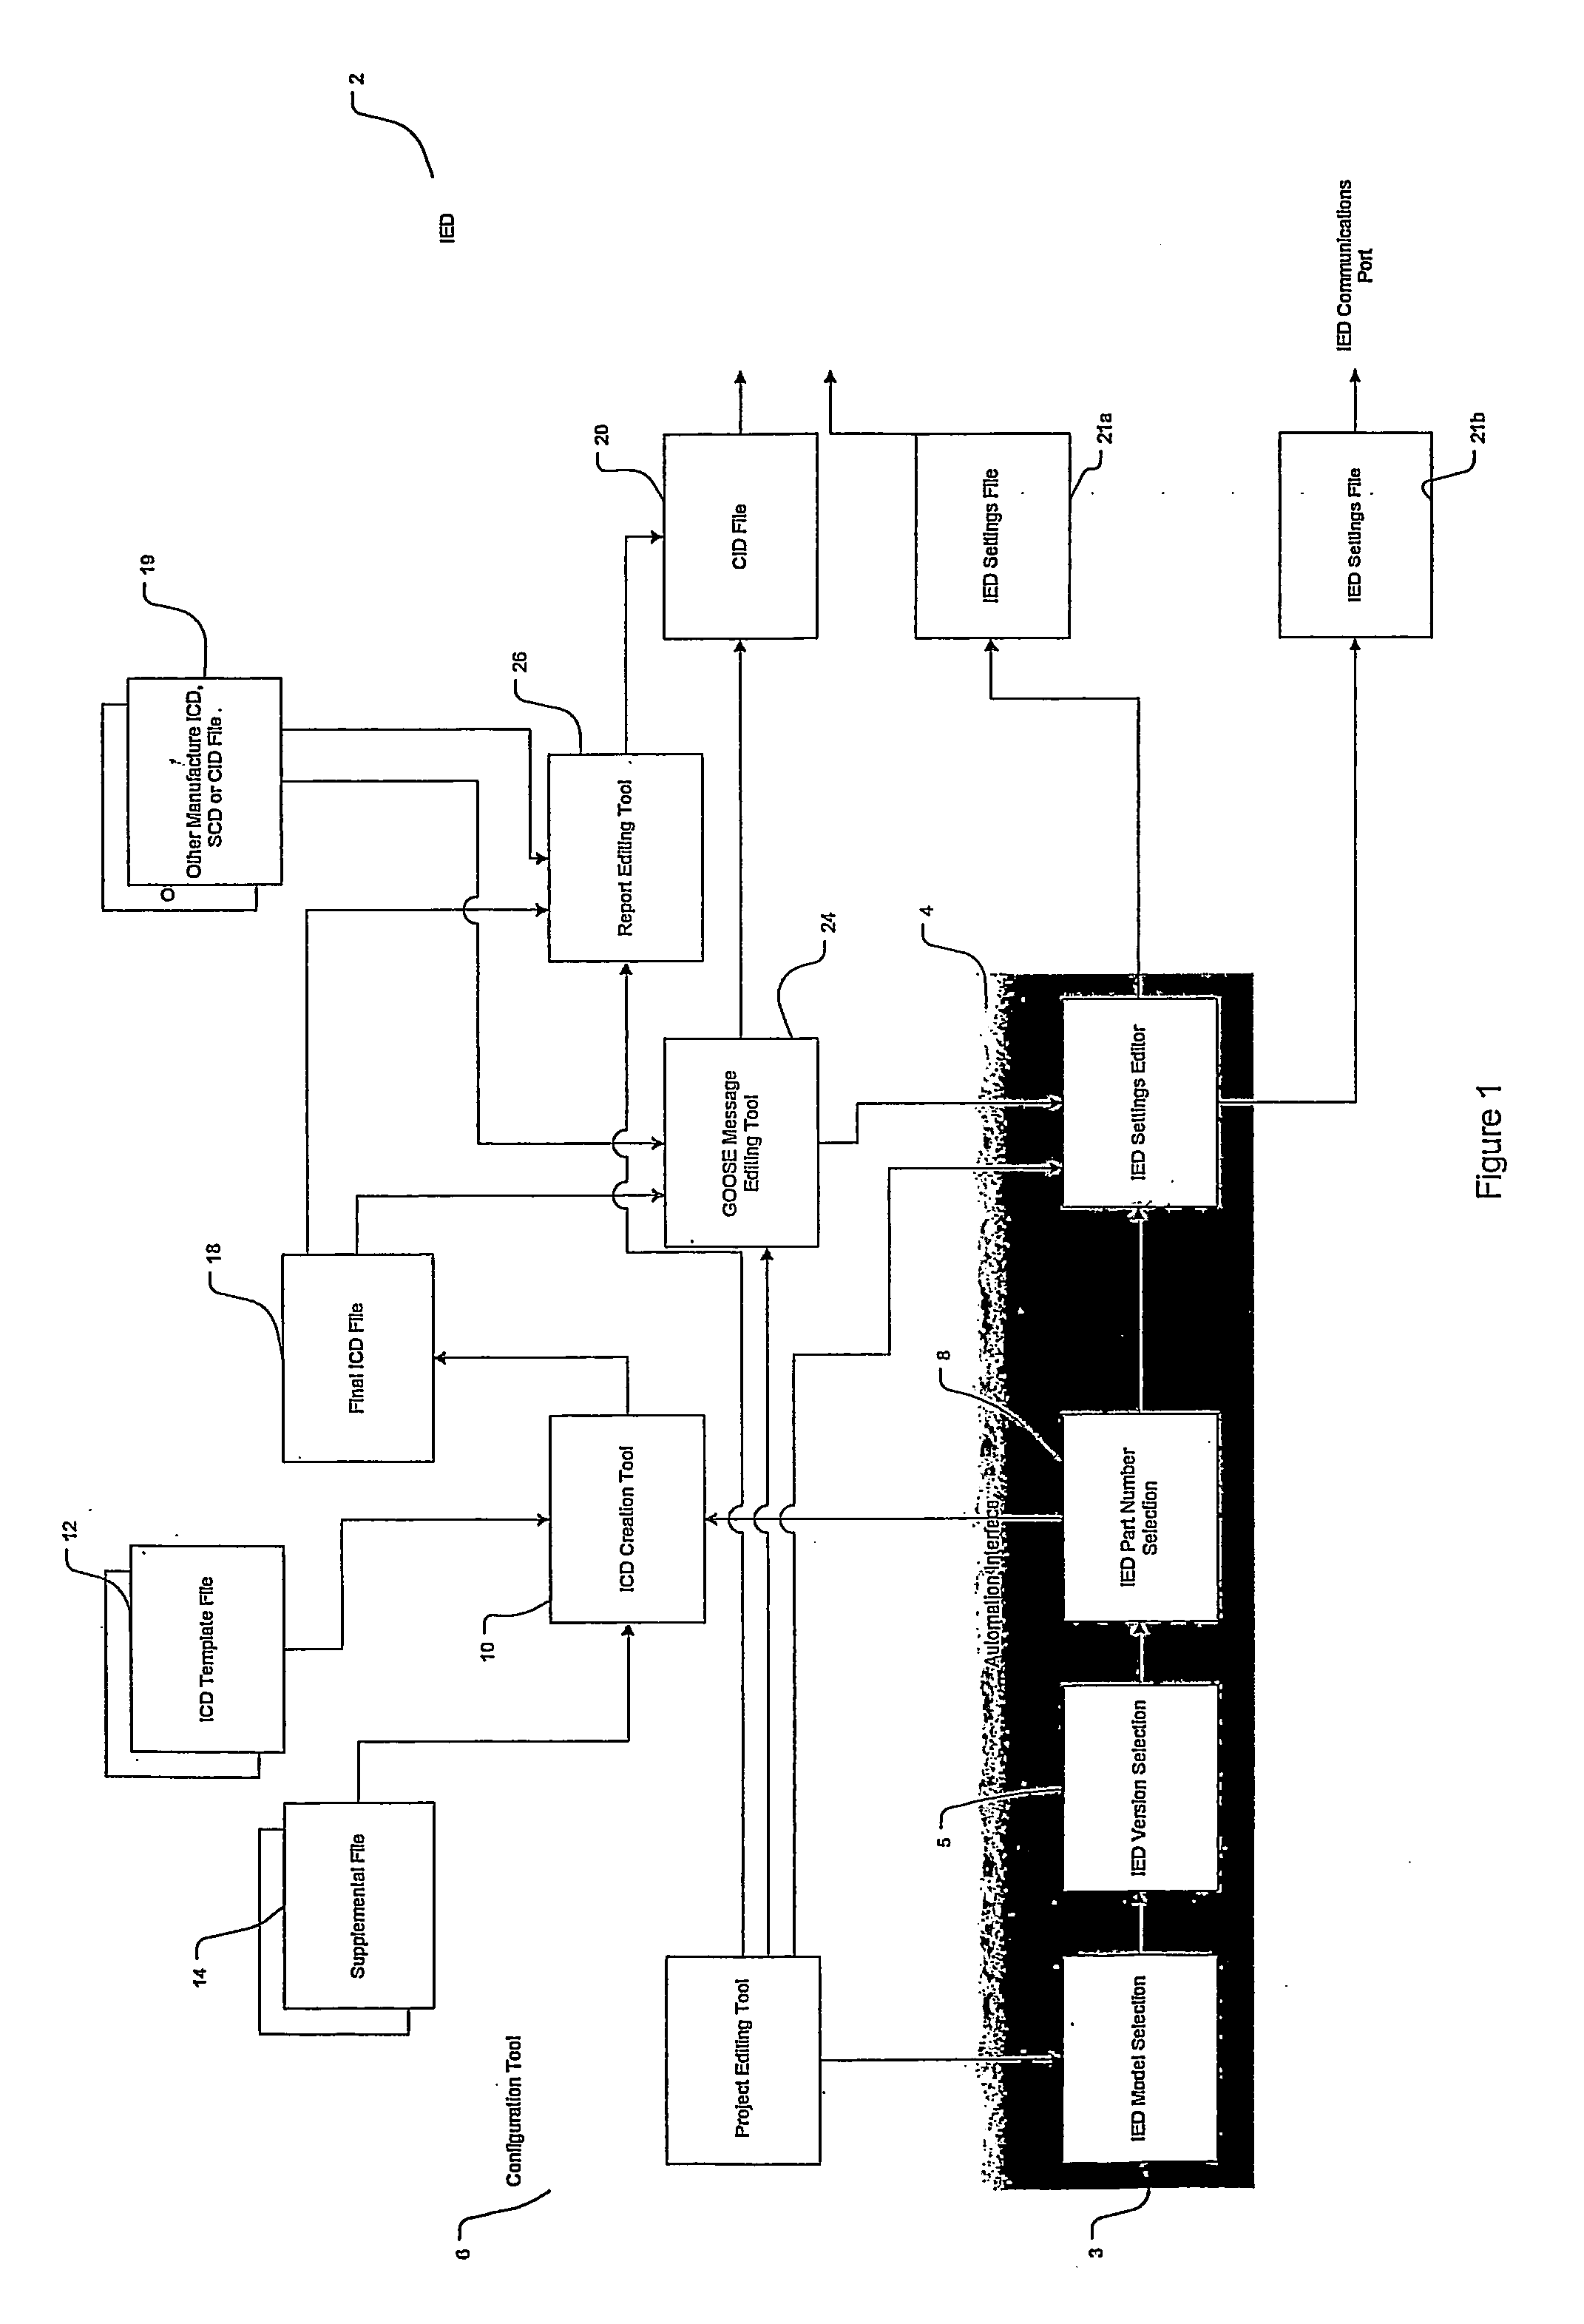 Method of configuring intelligent electronic devices to facilitate standardized communication messages among a plurality of ieds within a network